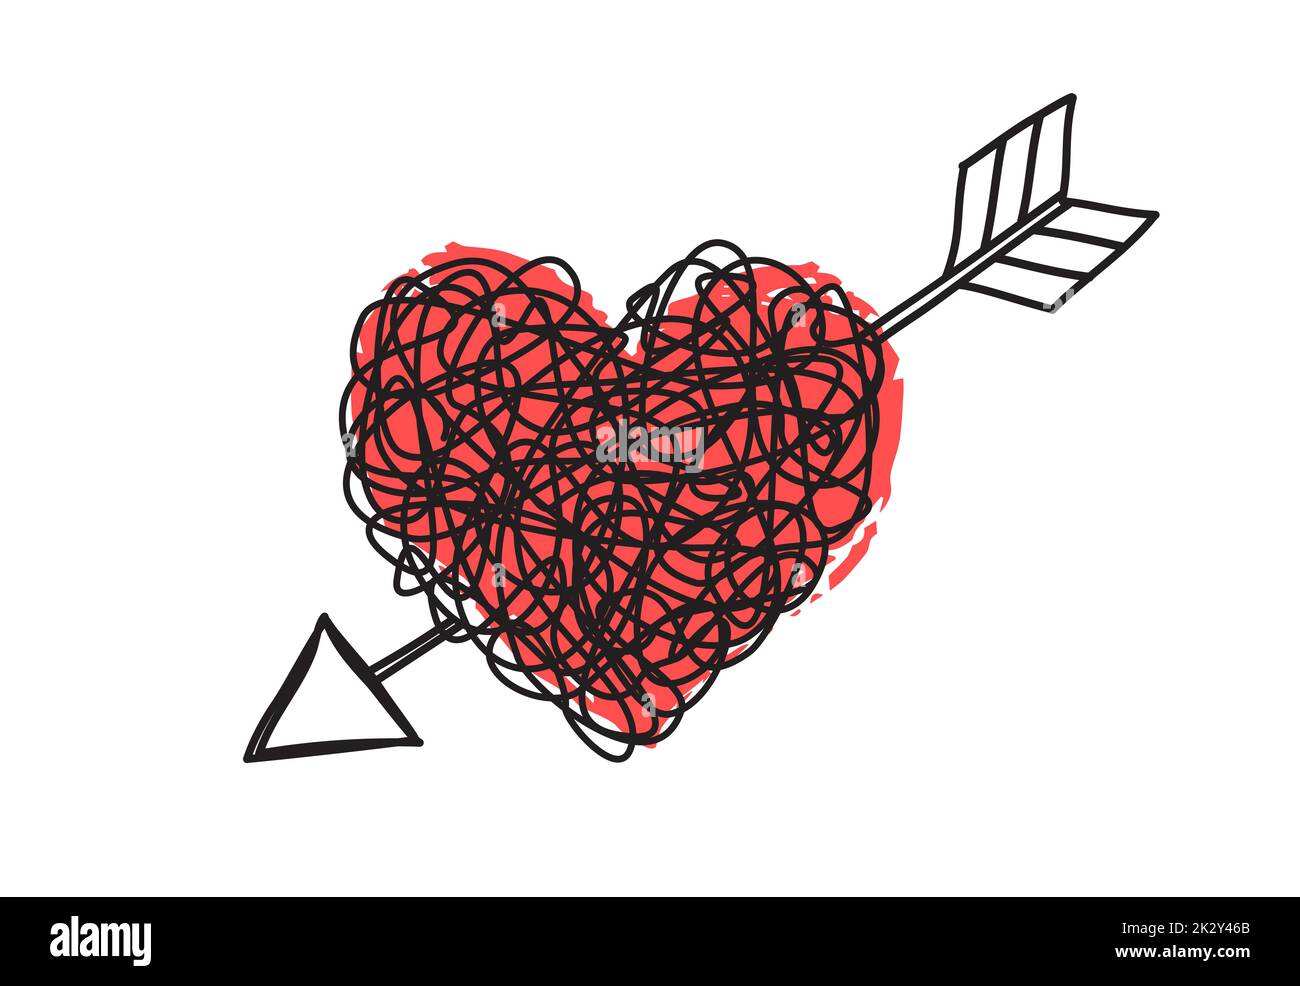 Heart and arrow shaped tangled grungy scribble Stock Photo